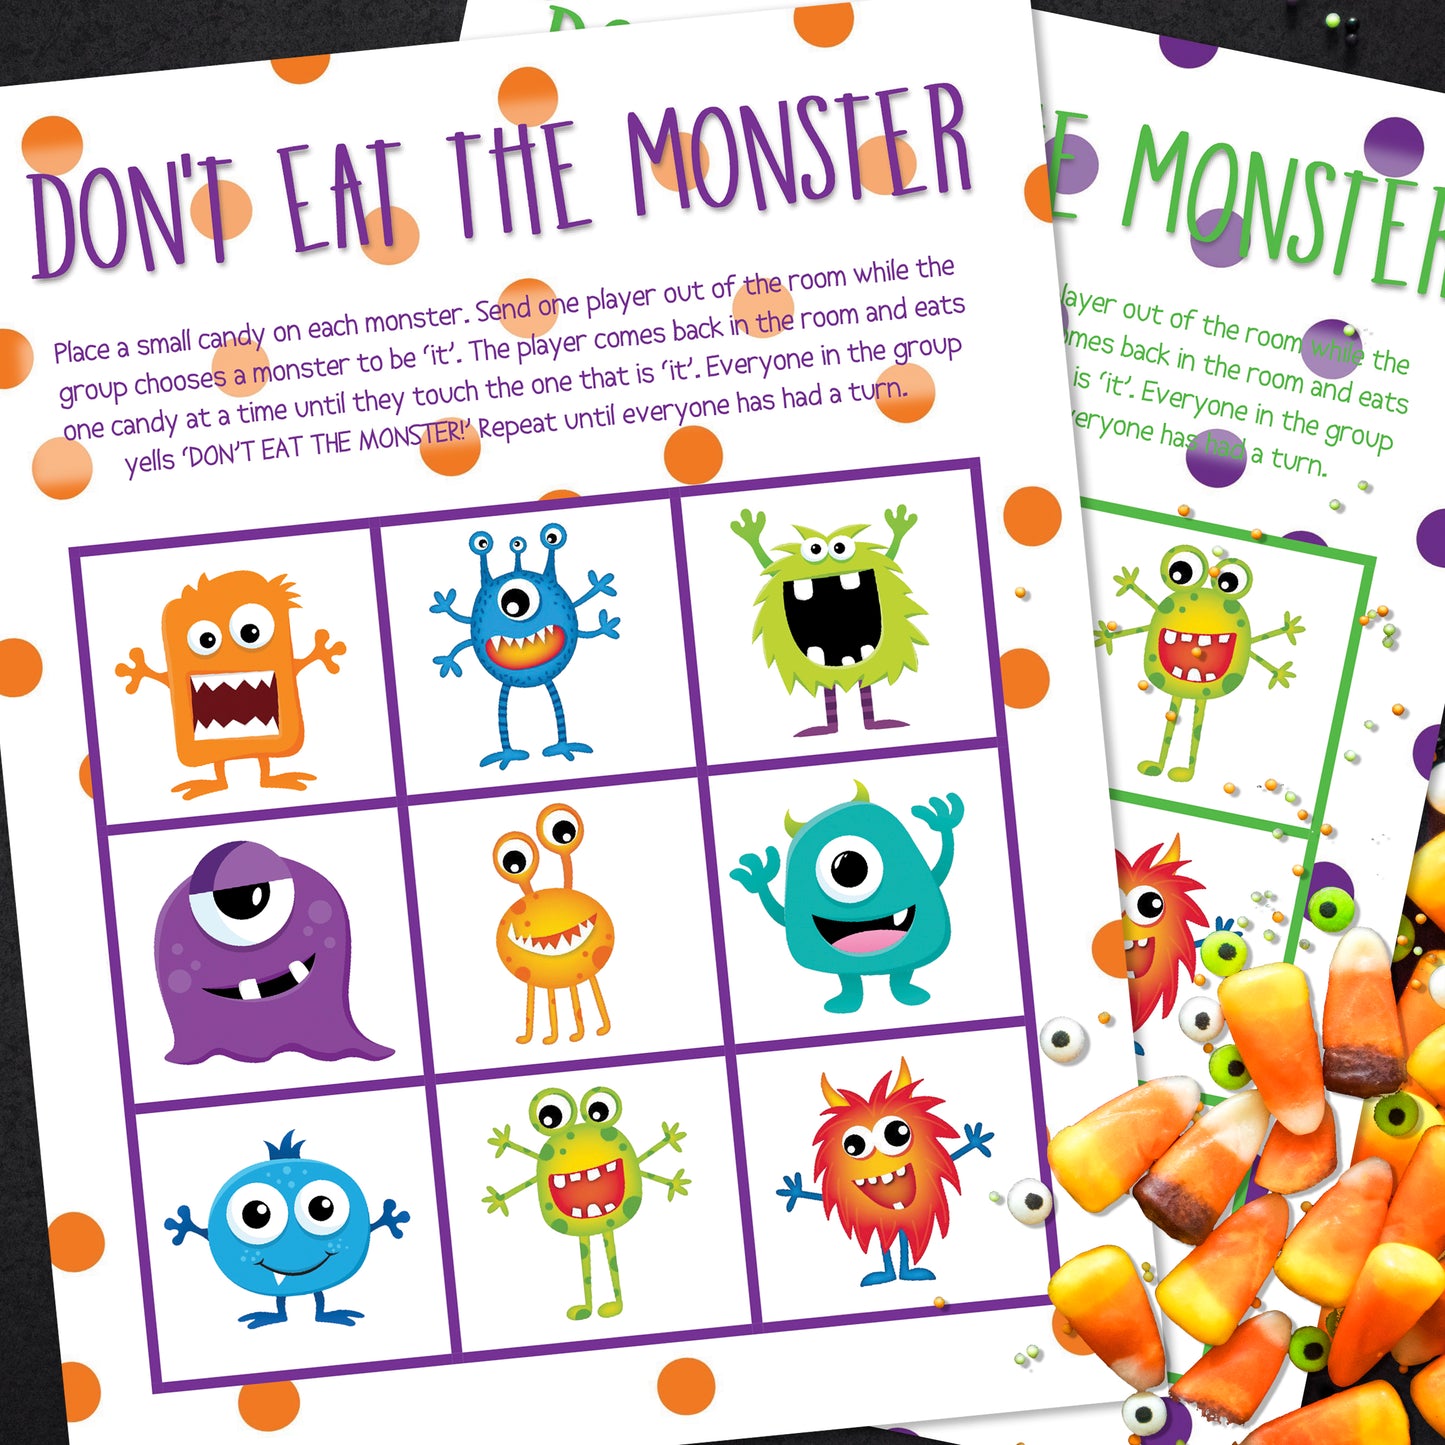 Don't Eat the Monster! Game